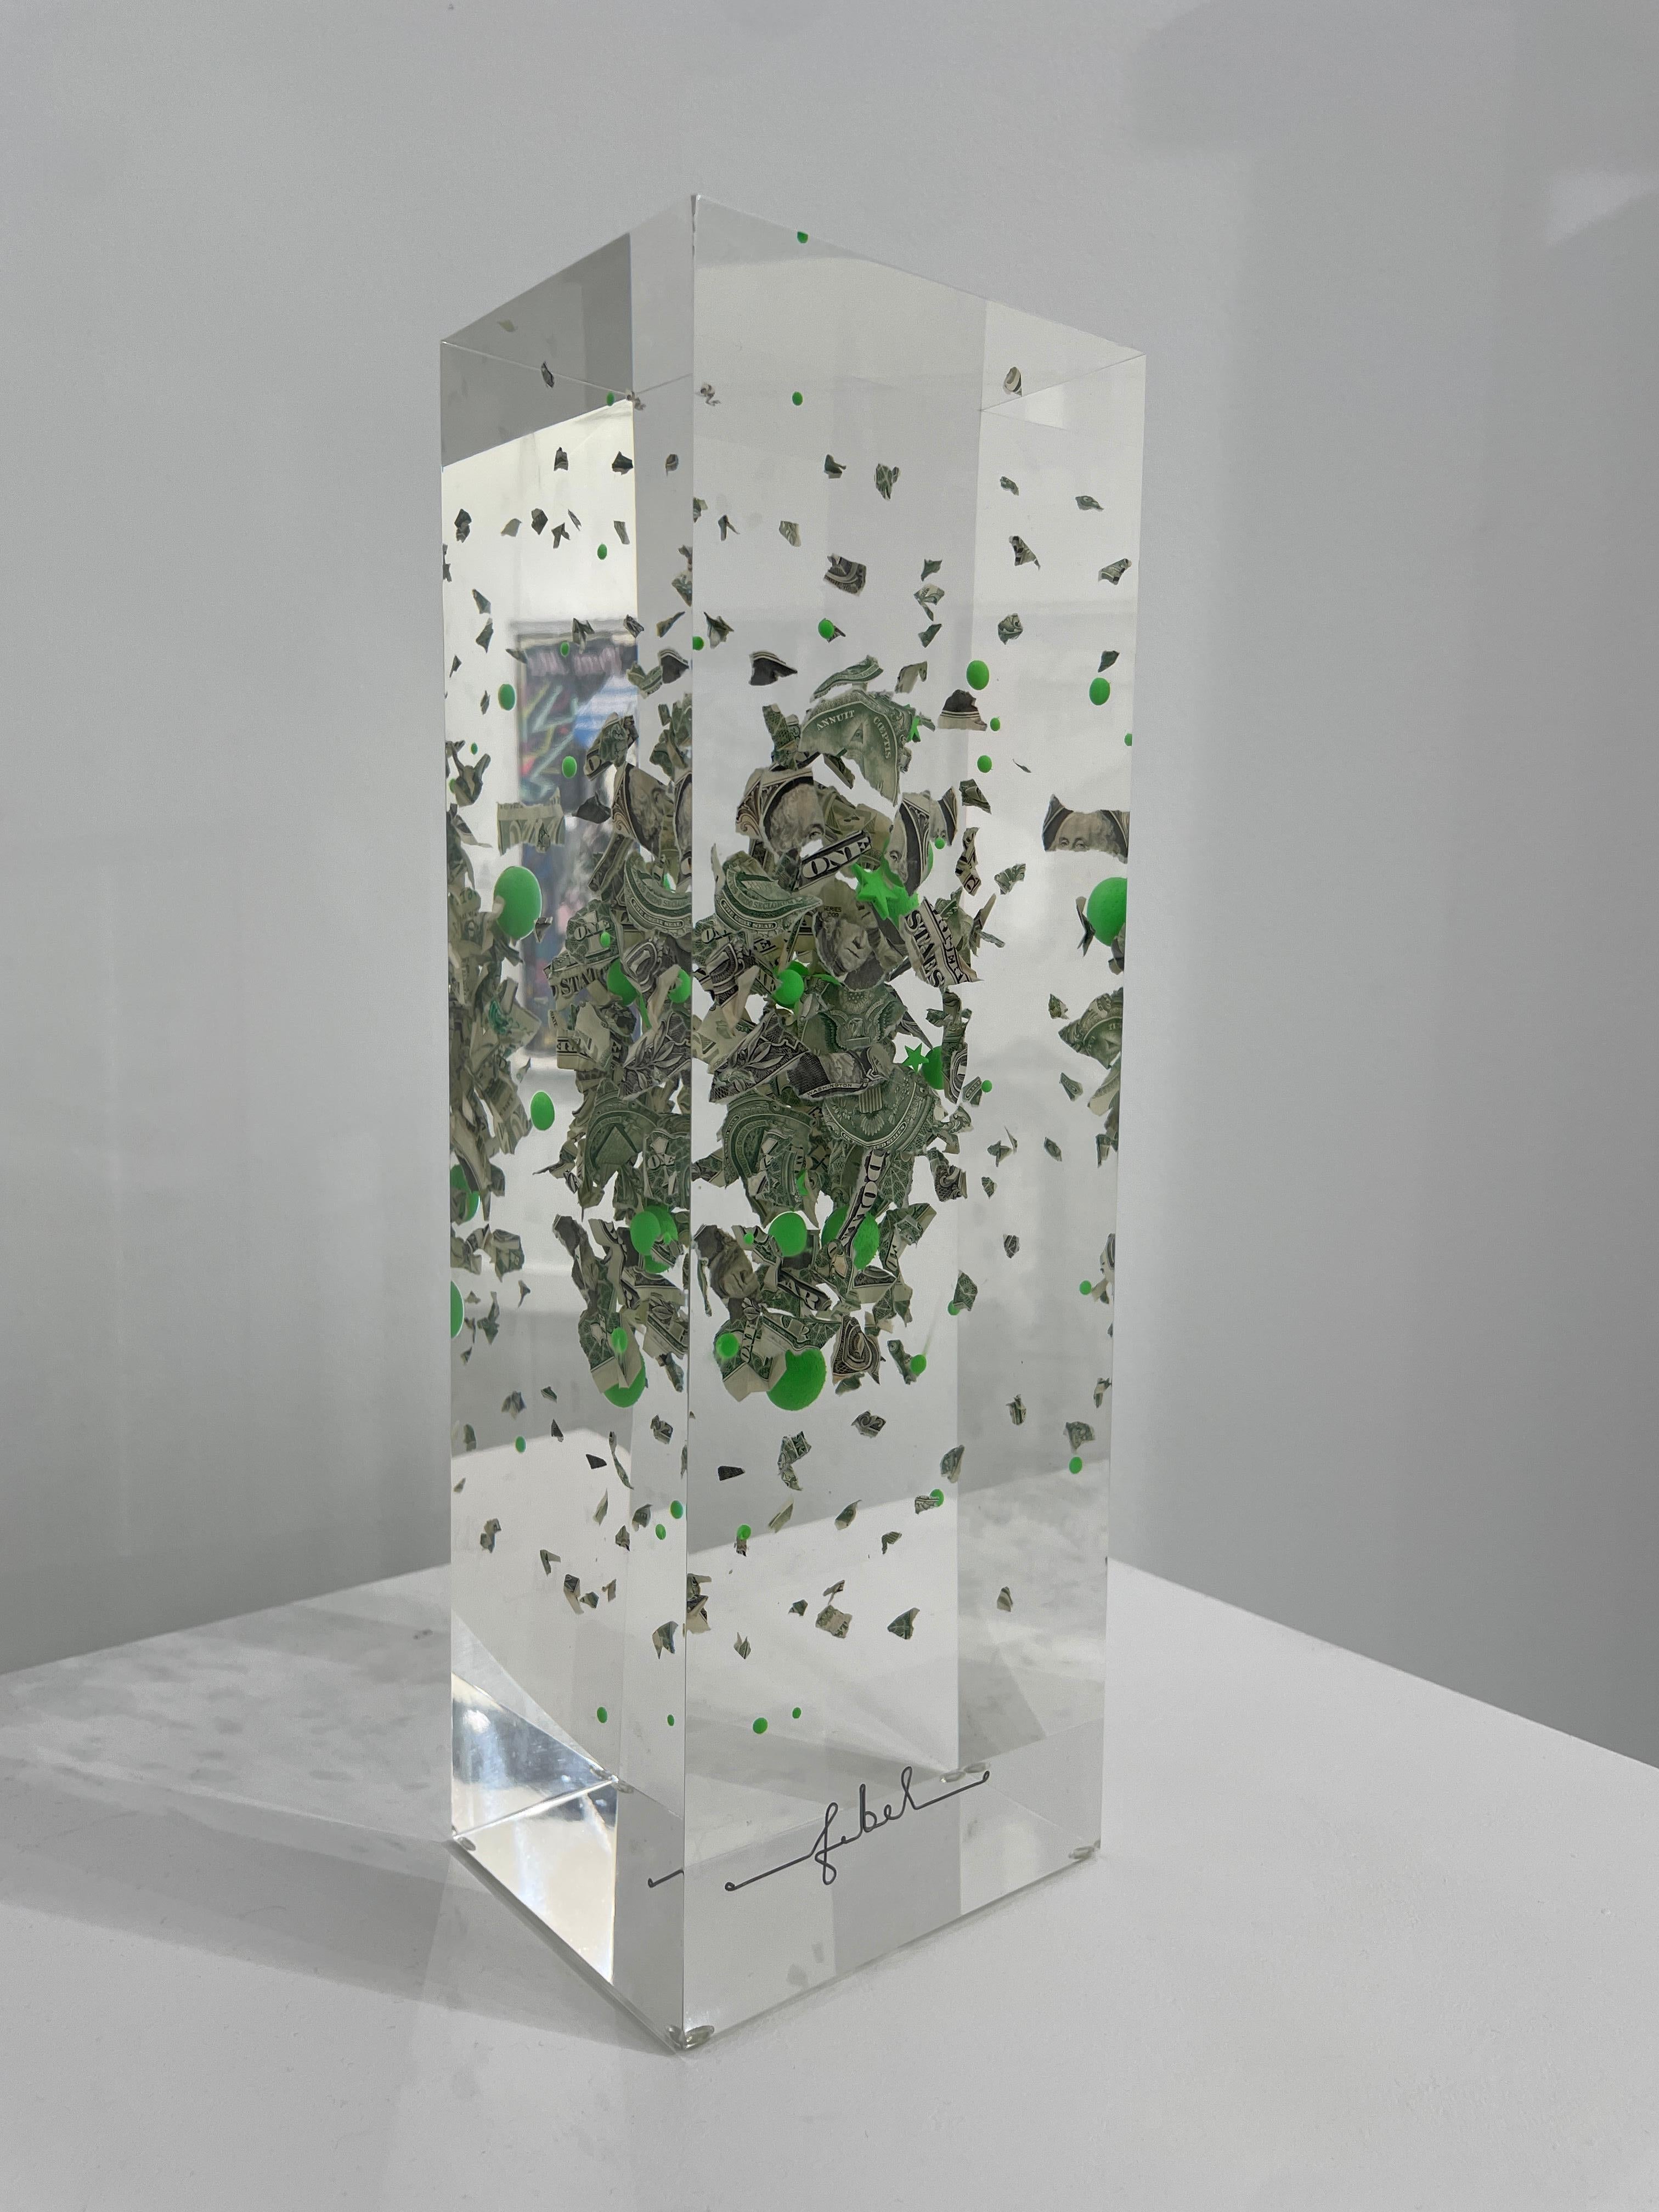 Dollars and Green Bubbles - Contemporary Sculpture by Francois Bel